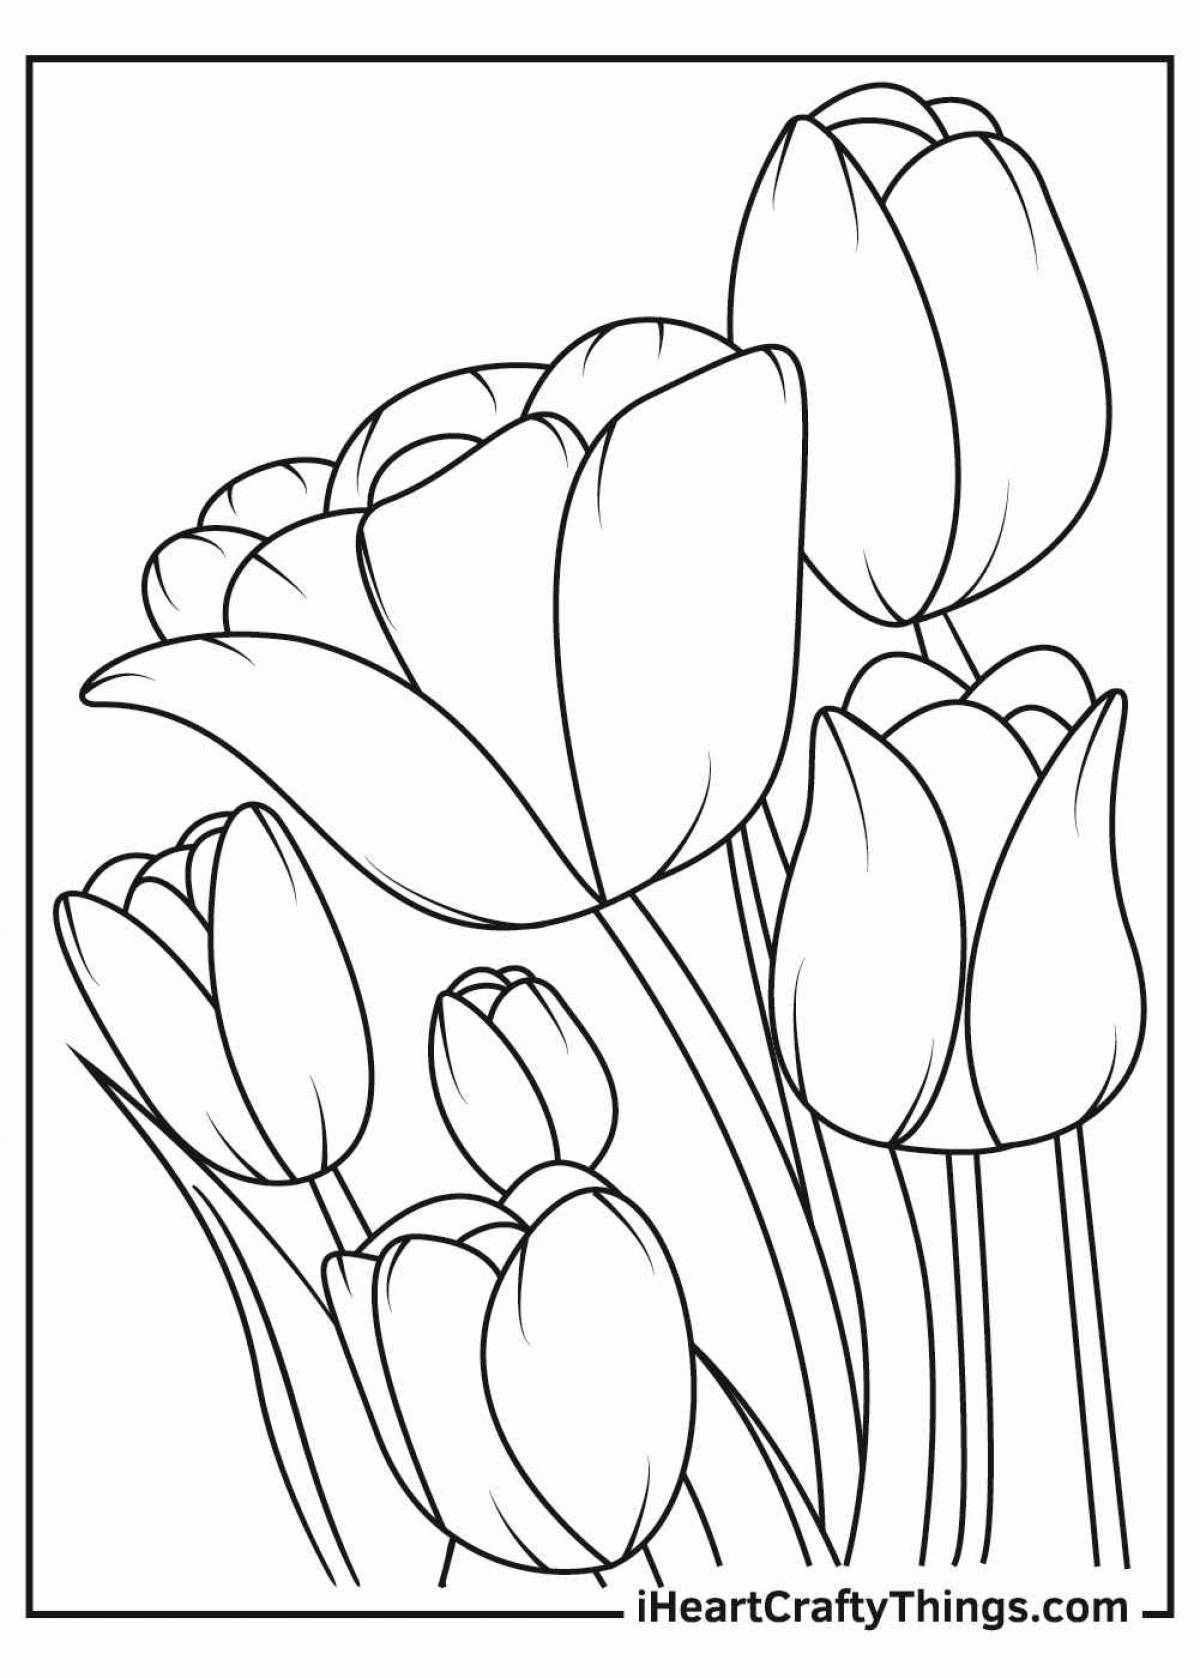 Gorgeous tulips coloring book for 5-6 year olds